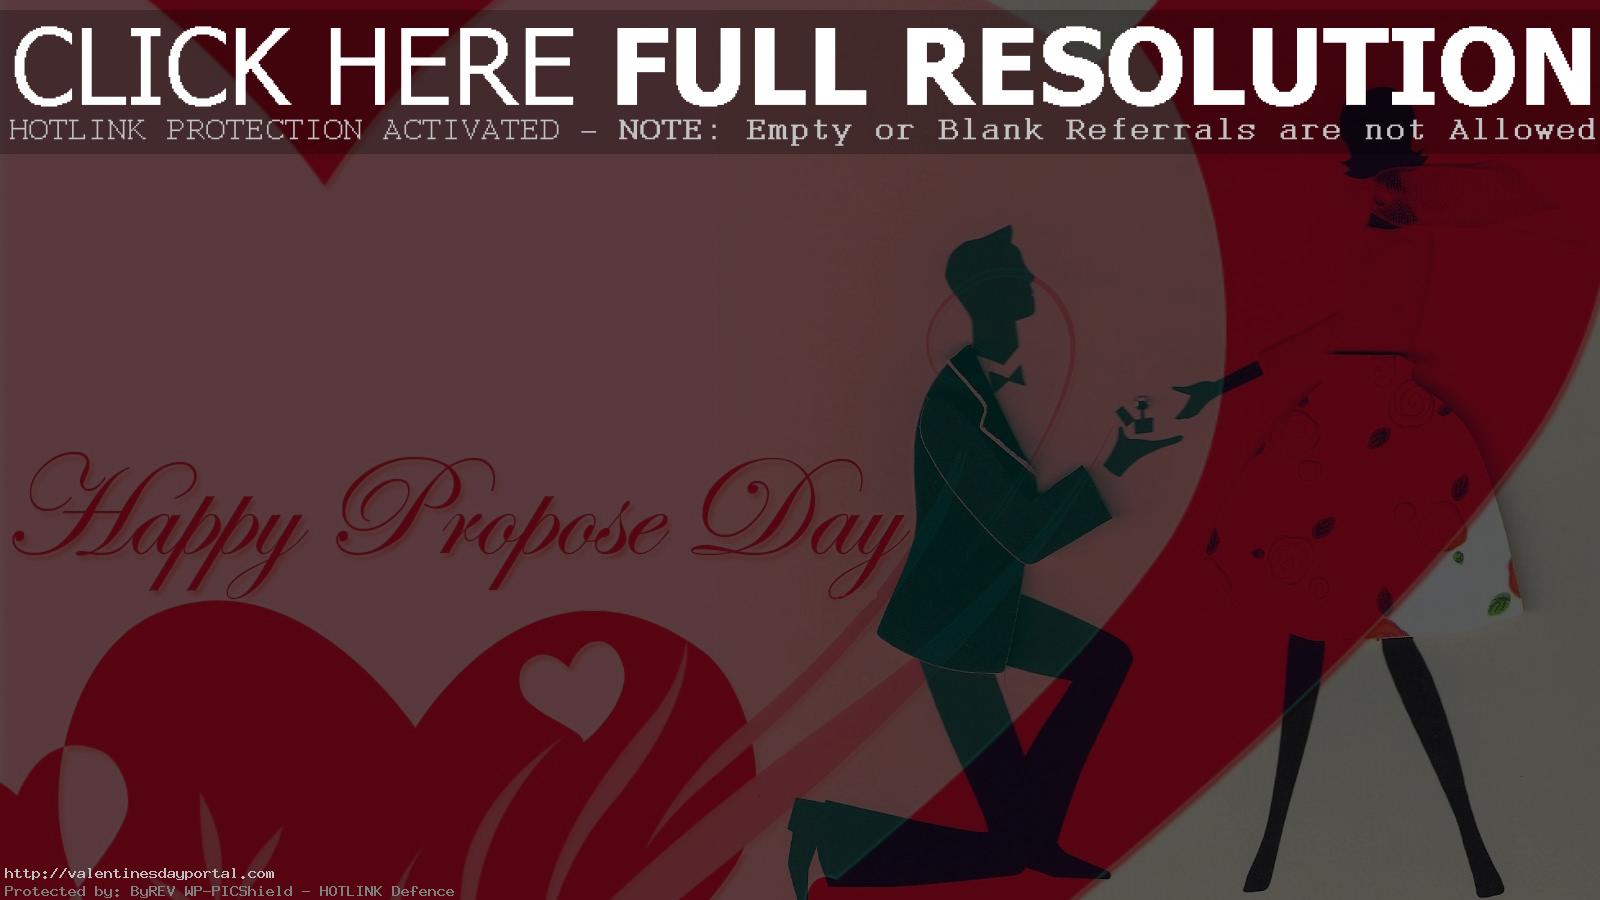 Latest*} Happy Propose Day 2018 Images, Pictures With - Warren Street Tube Station , HD Wallpaper & Backgrounds